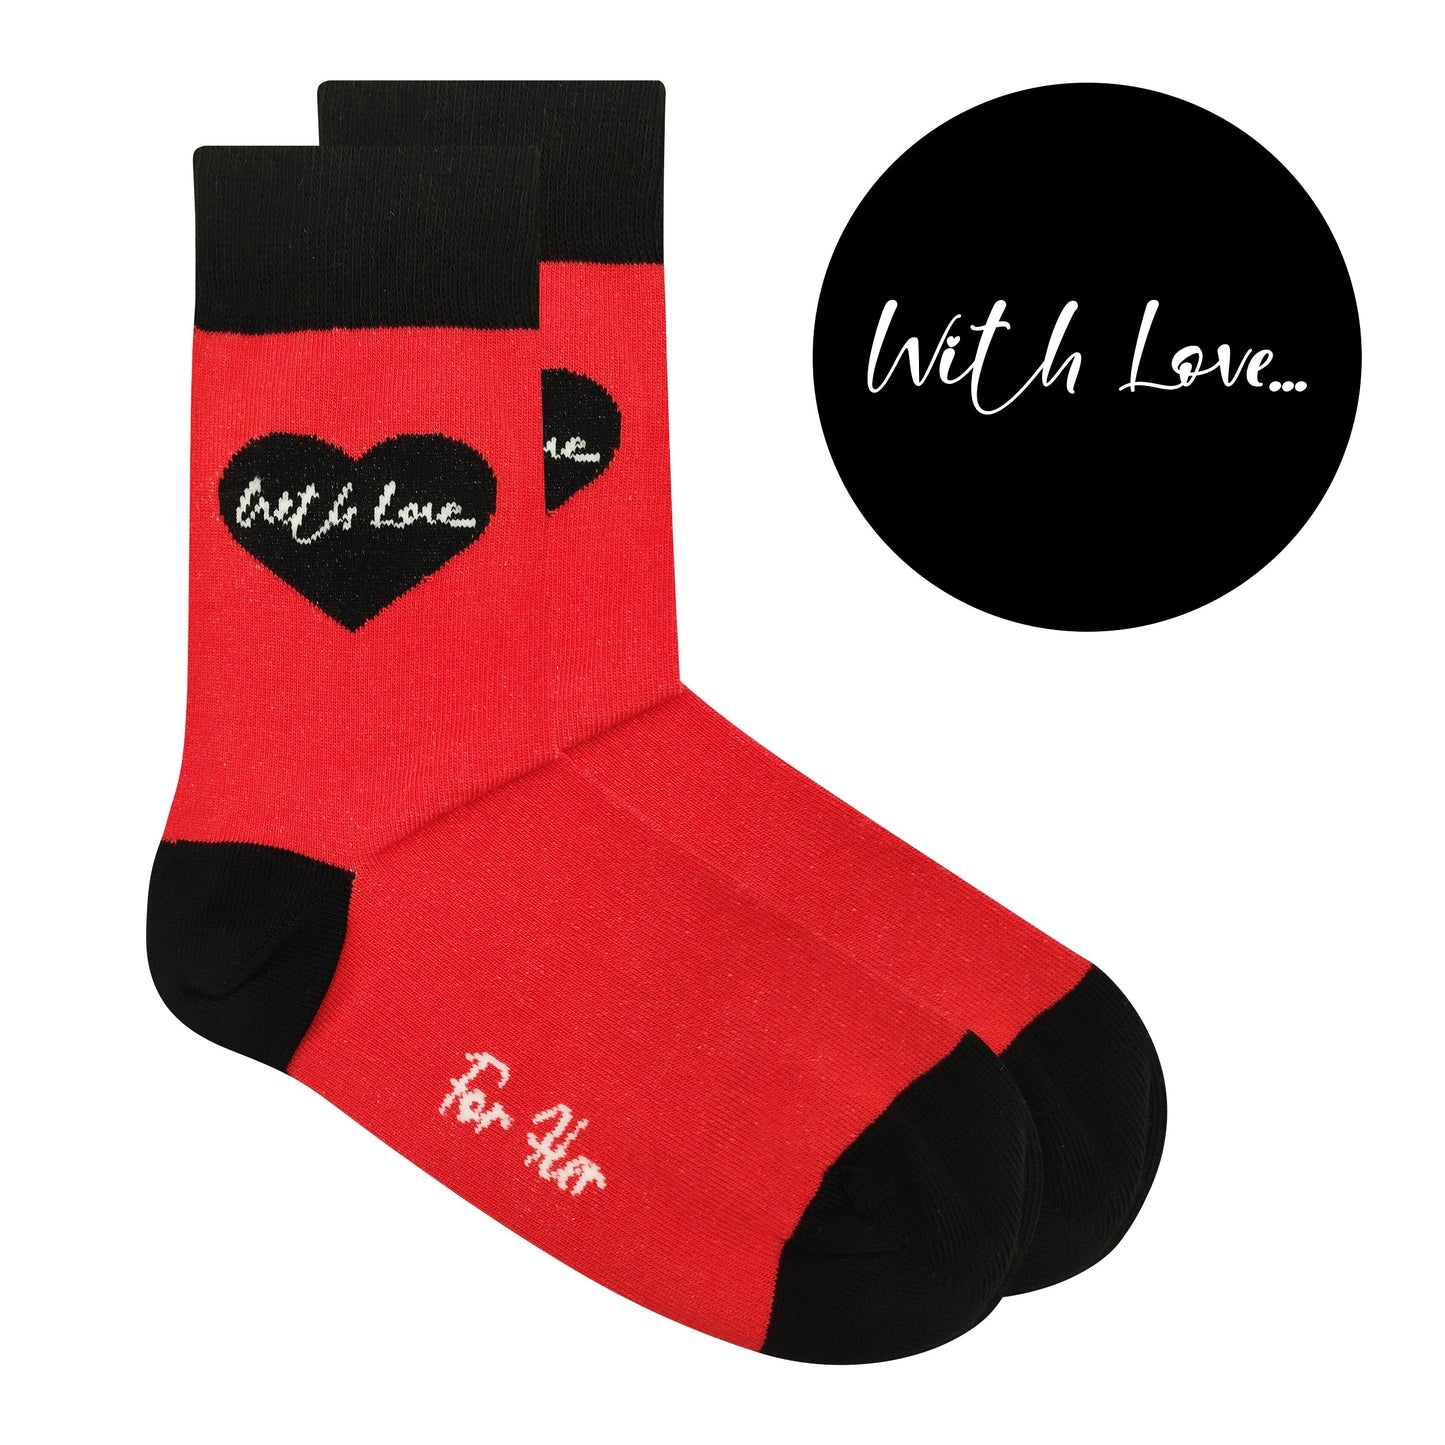 With Love Socks Gift Box - For Her Size UK 4 - 7